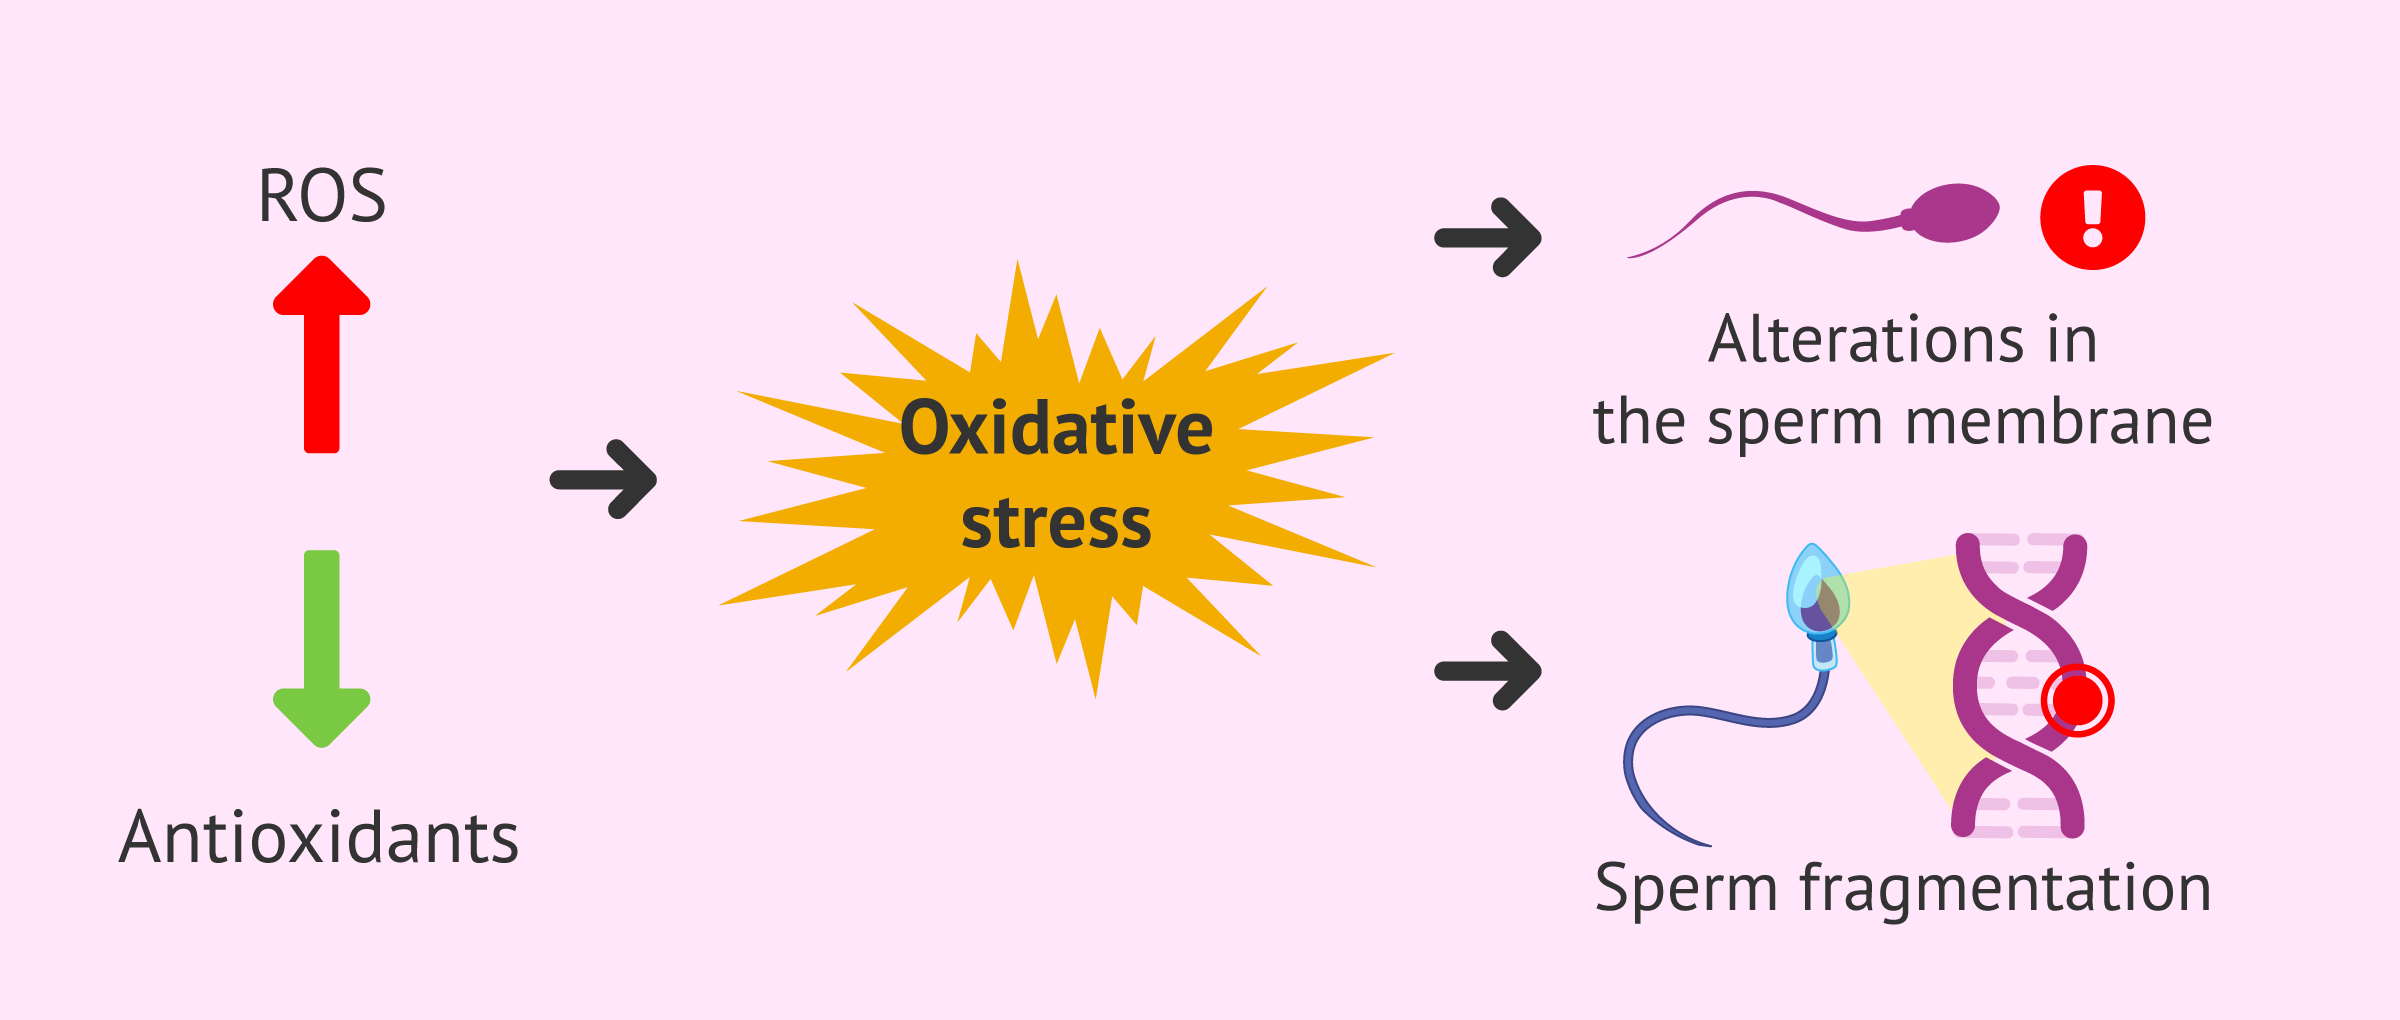 Oxidative stress and recurrent miscarriage